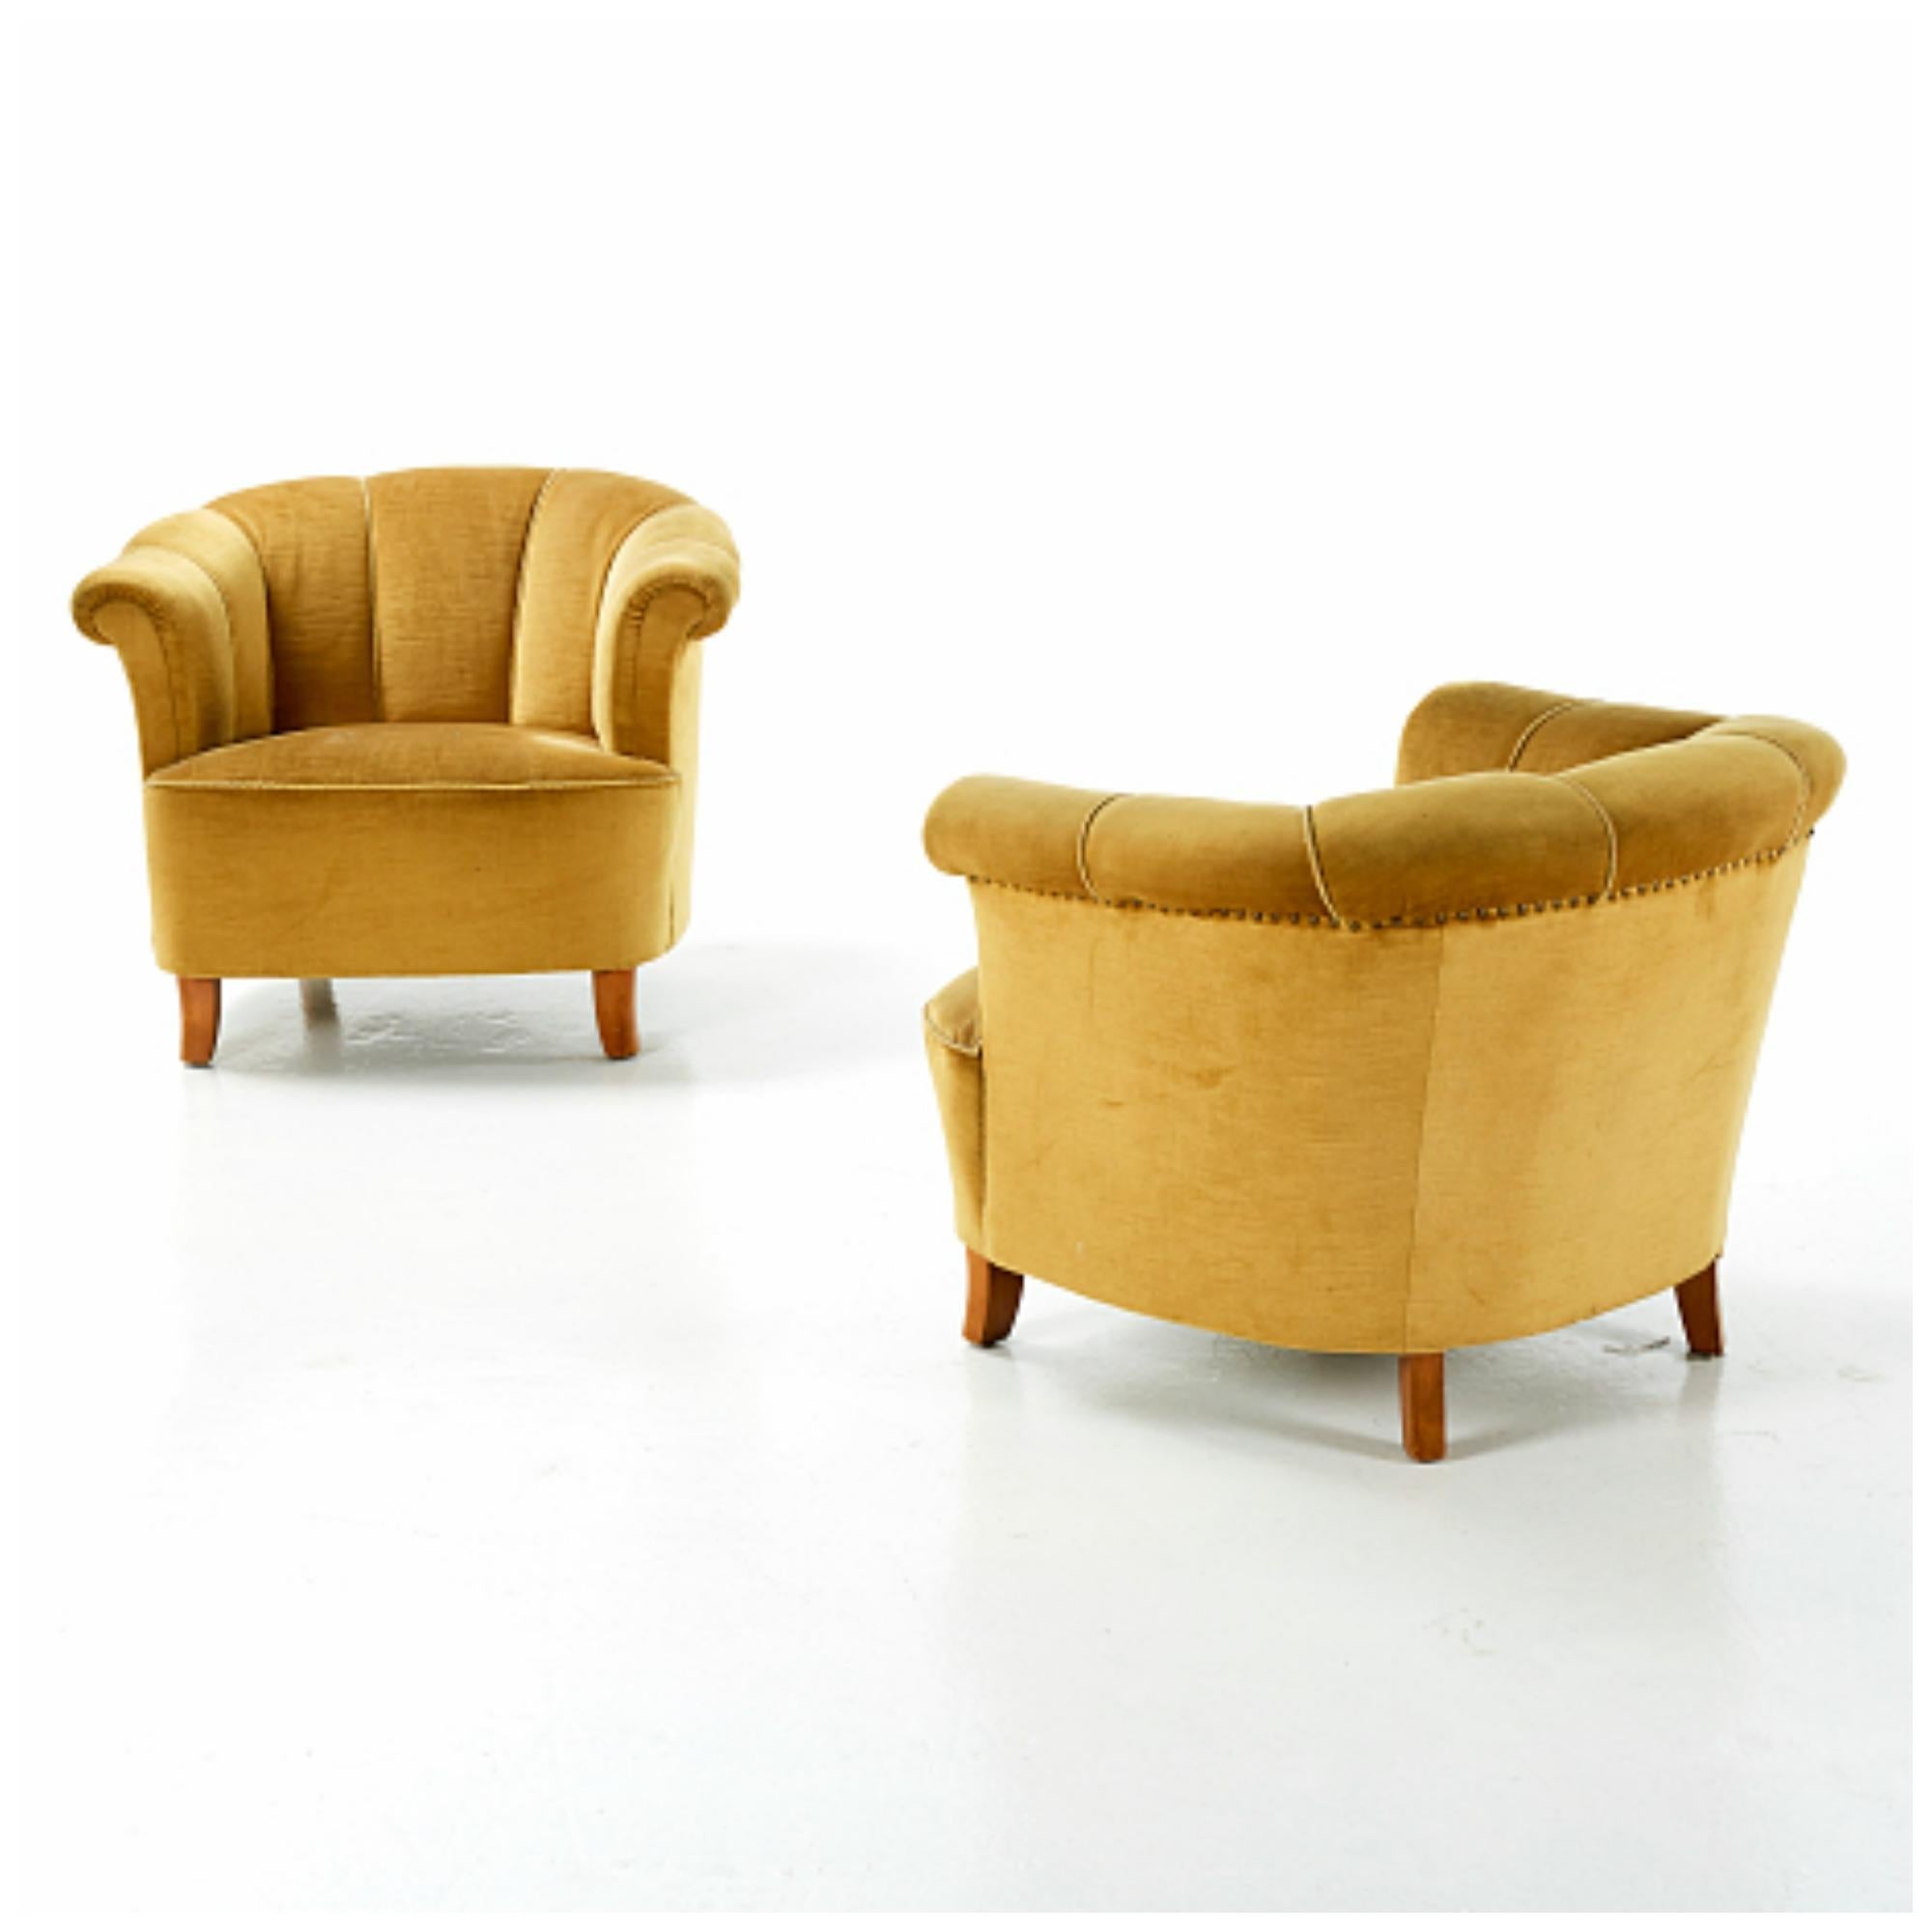 Superb pair of 1940s lounge chairs attributed to Otto Schulz designed for Boet - Schulz' own high-end retail store in Gothenburg, Sweden. The chairs in wool and birch wood with brass tacks is very representative of his innovative low swung designs